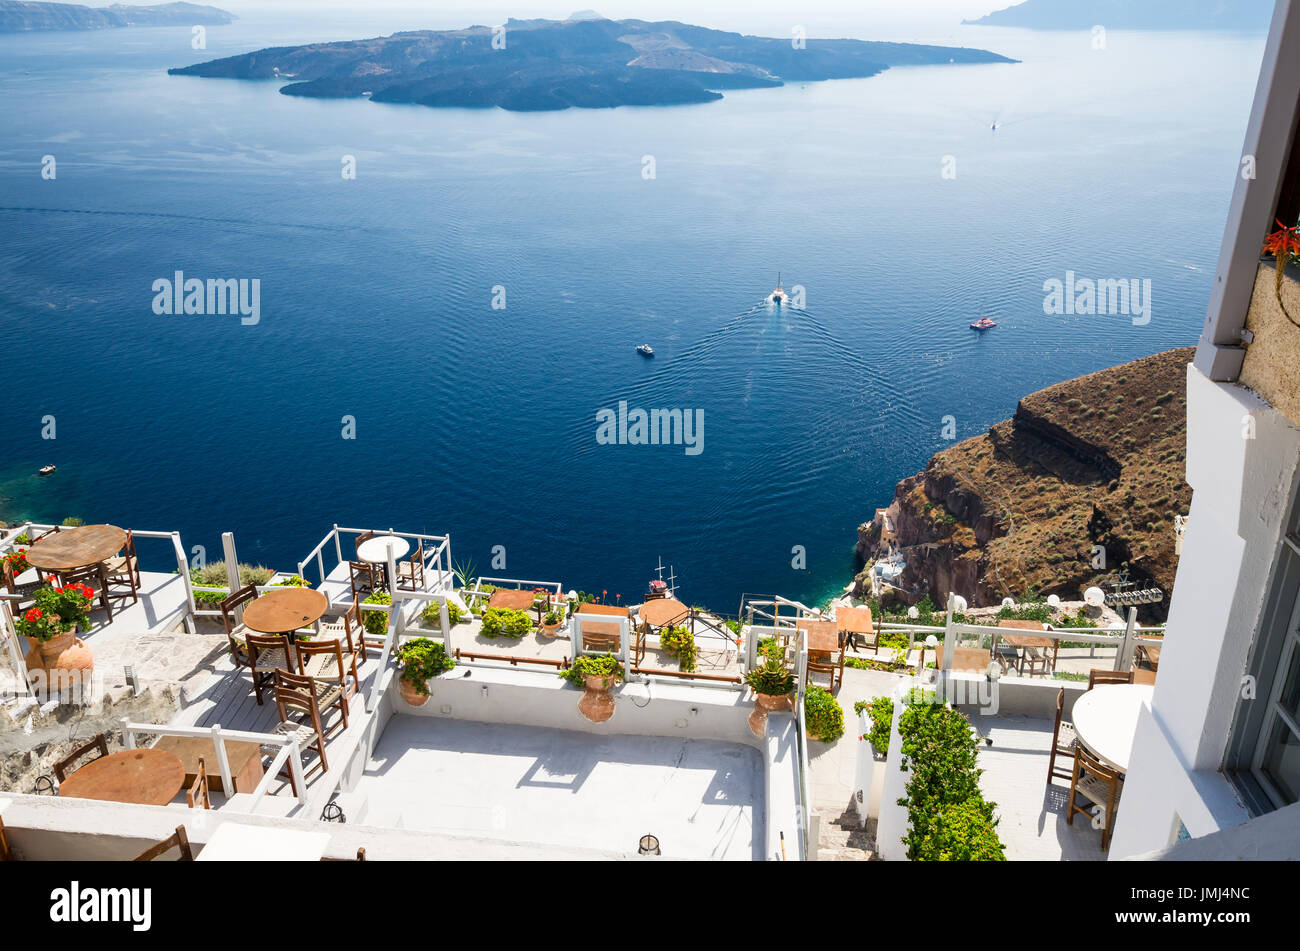 Fira, Thira town, Santorini, Cyclades islands, Greece. Beautiful view of the town with white buildings, blue church's roofs and many colored flowers. Stock Photo